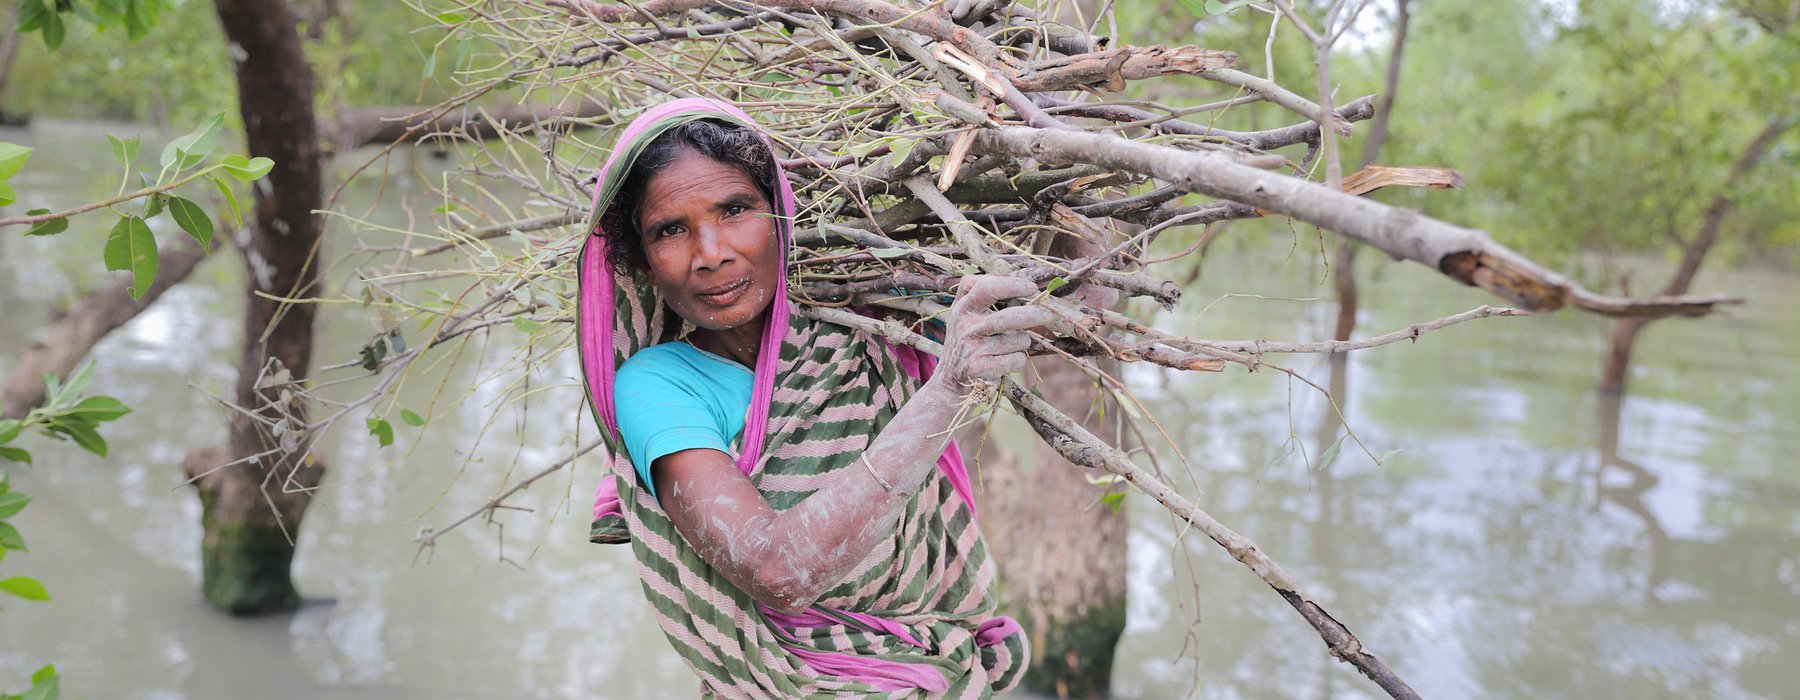 Nurjahan stands in floodwater with a bundle of sticks on her back and mud on her hands and smiles